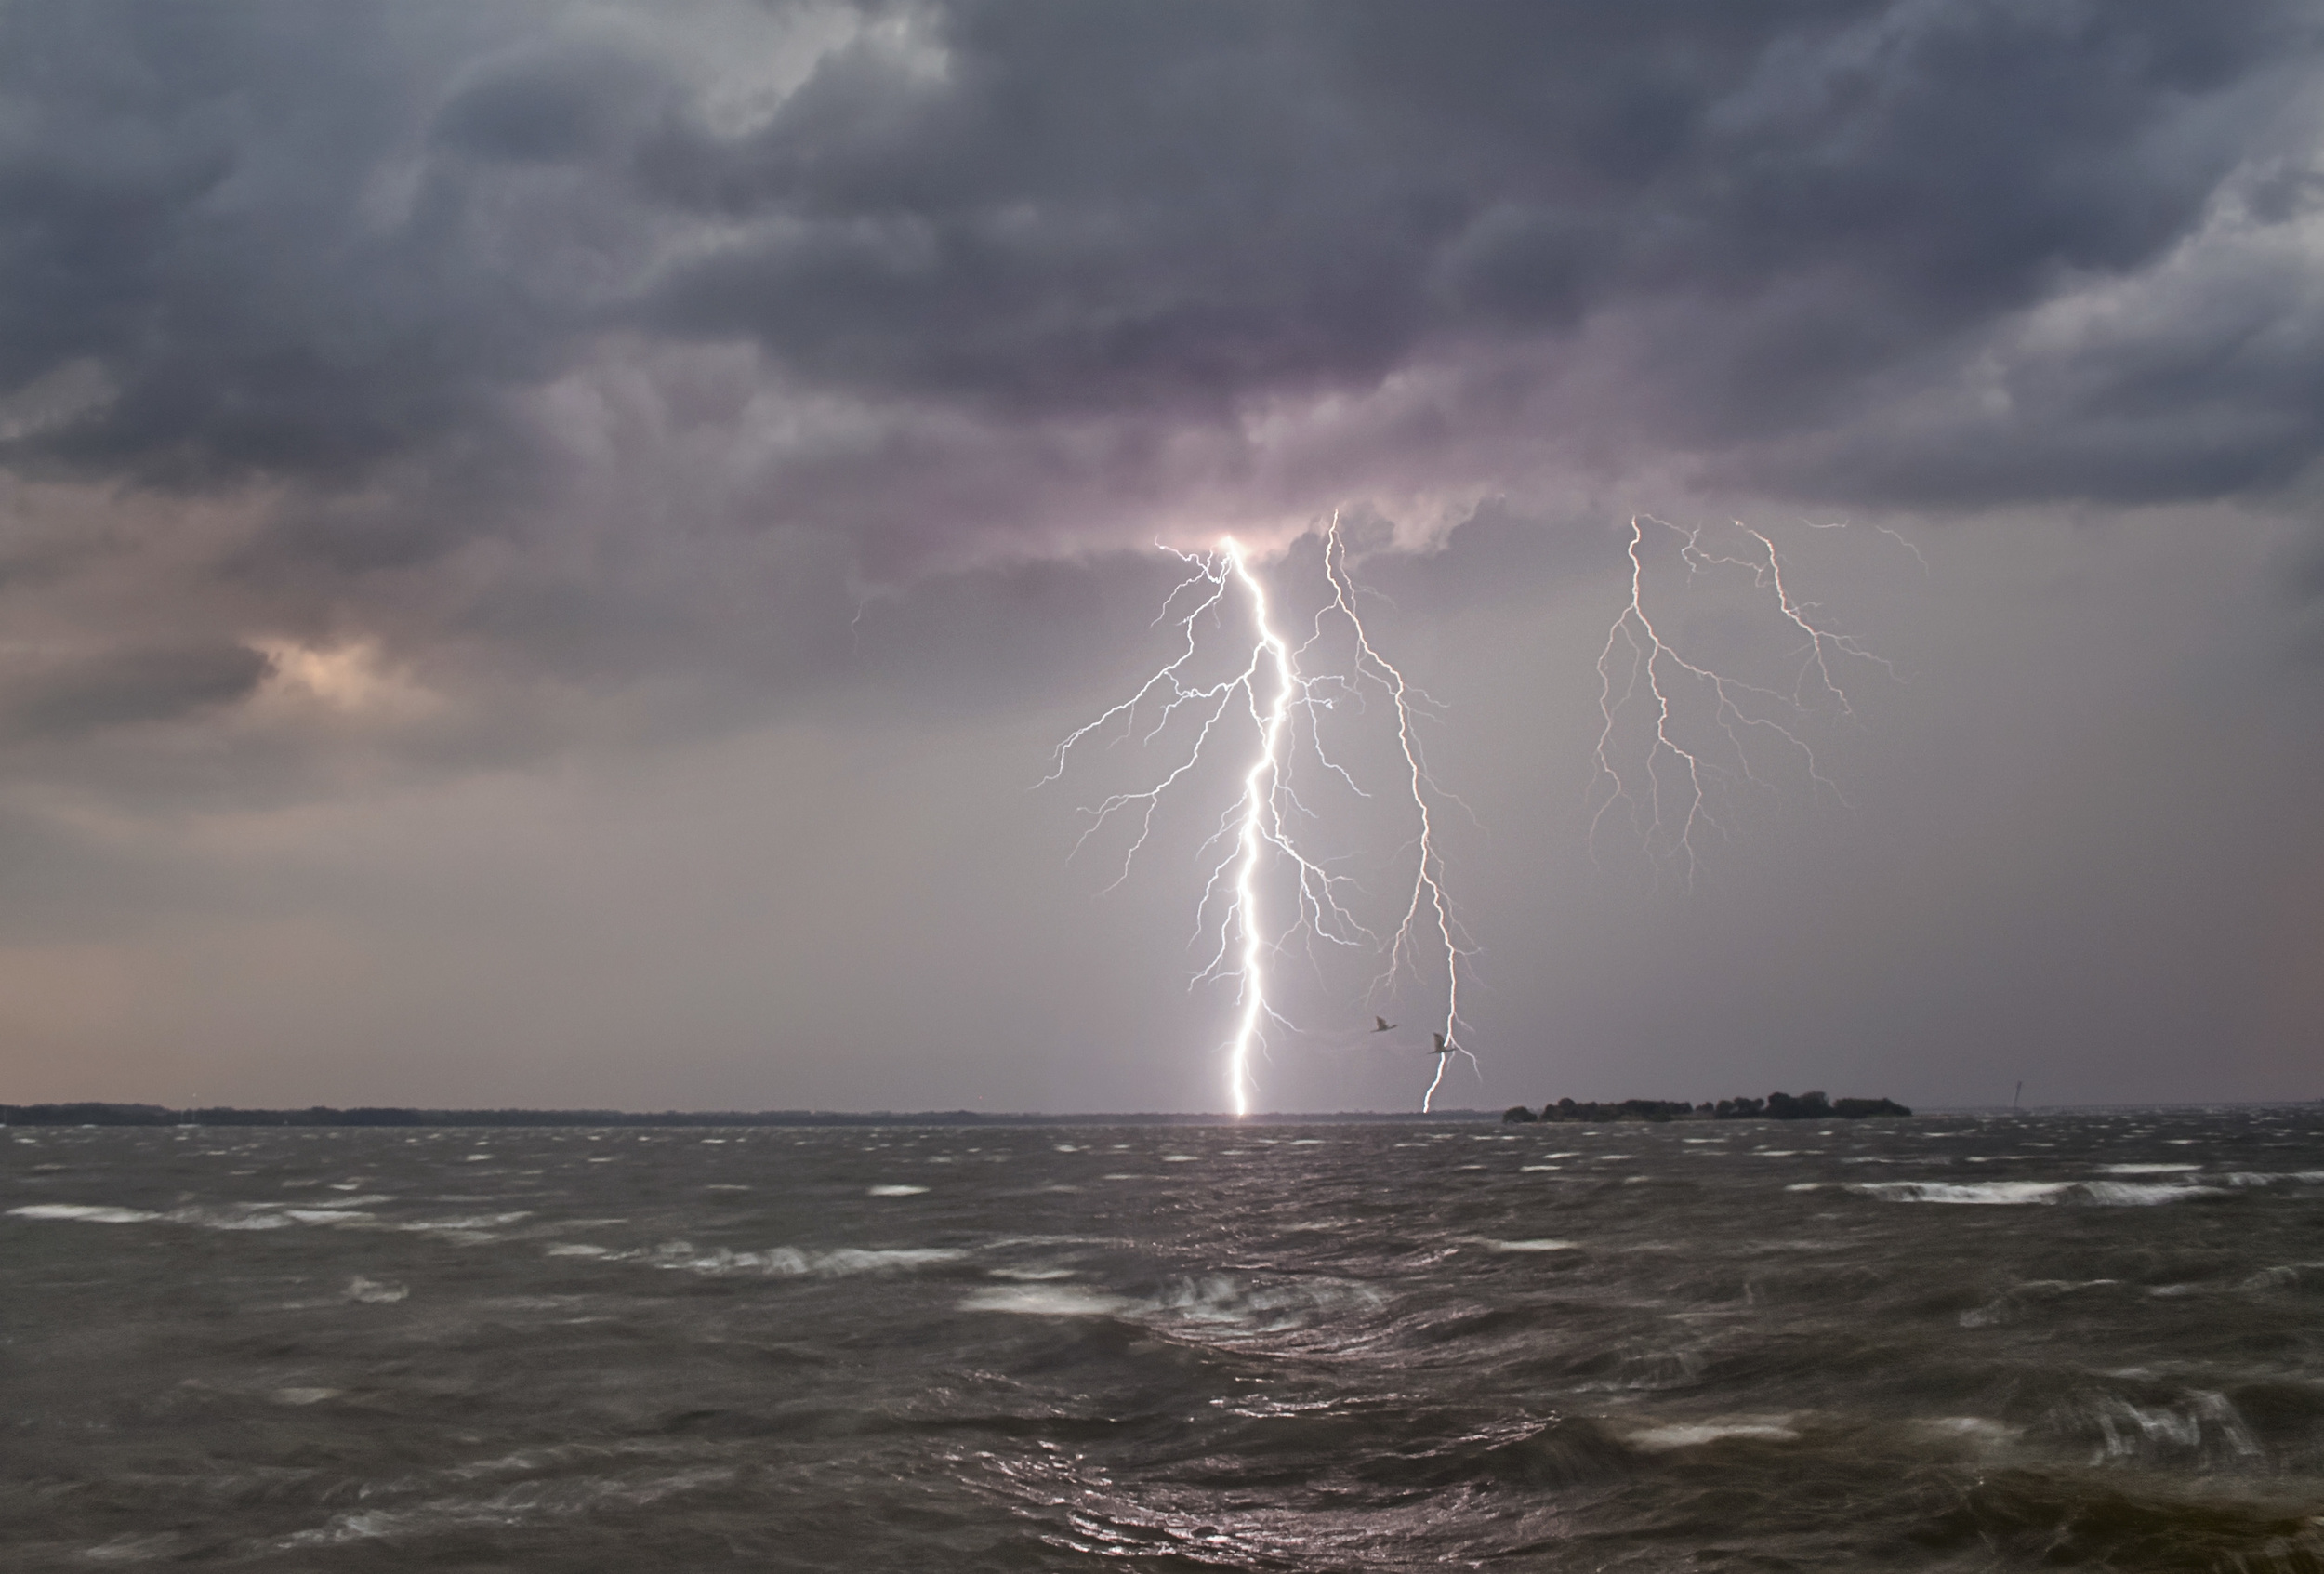   Two lightning strikes behind a pair of birds, over the Indian River in Titusville, Florida  